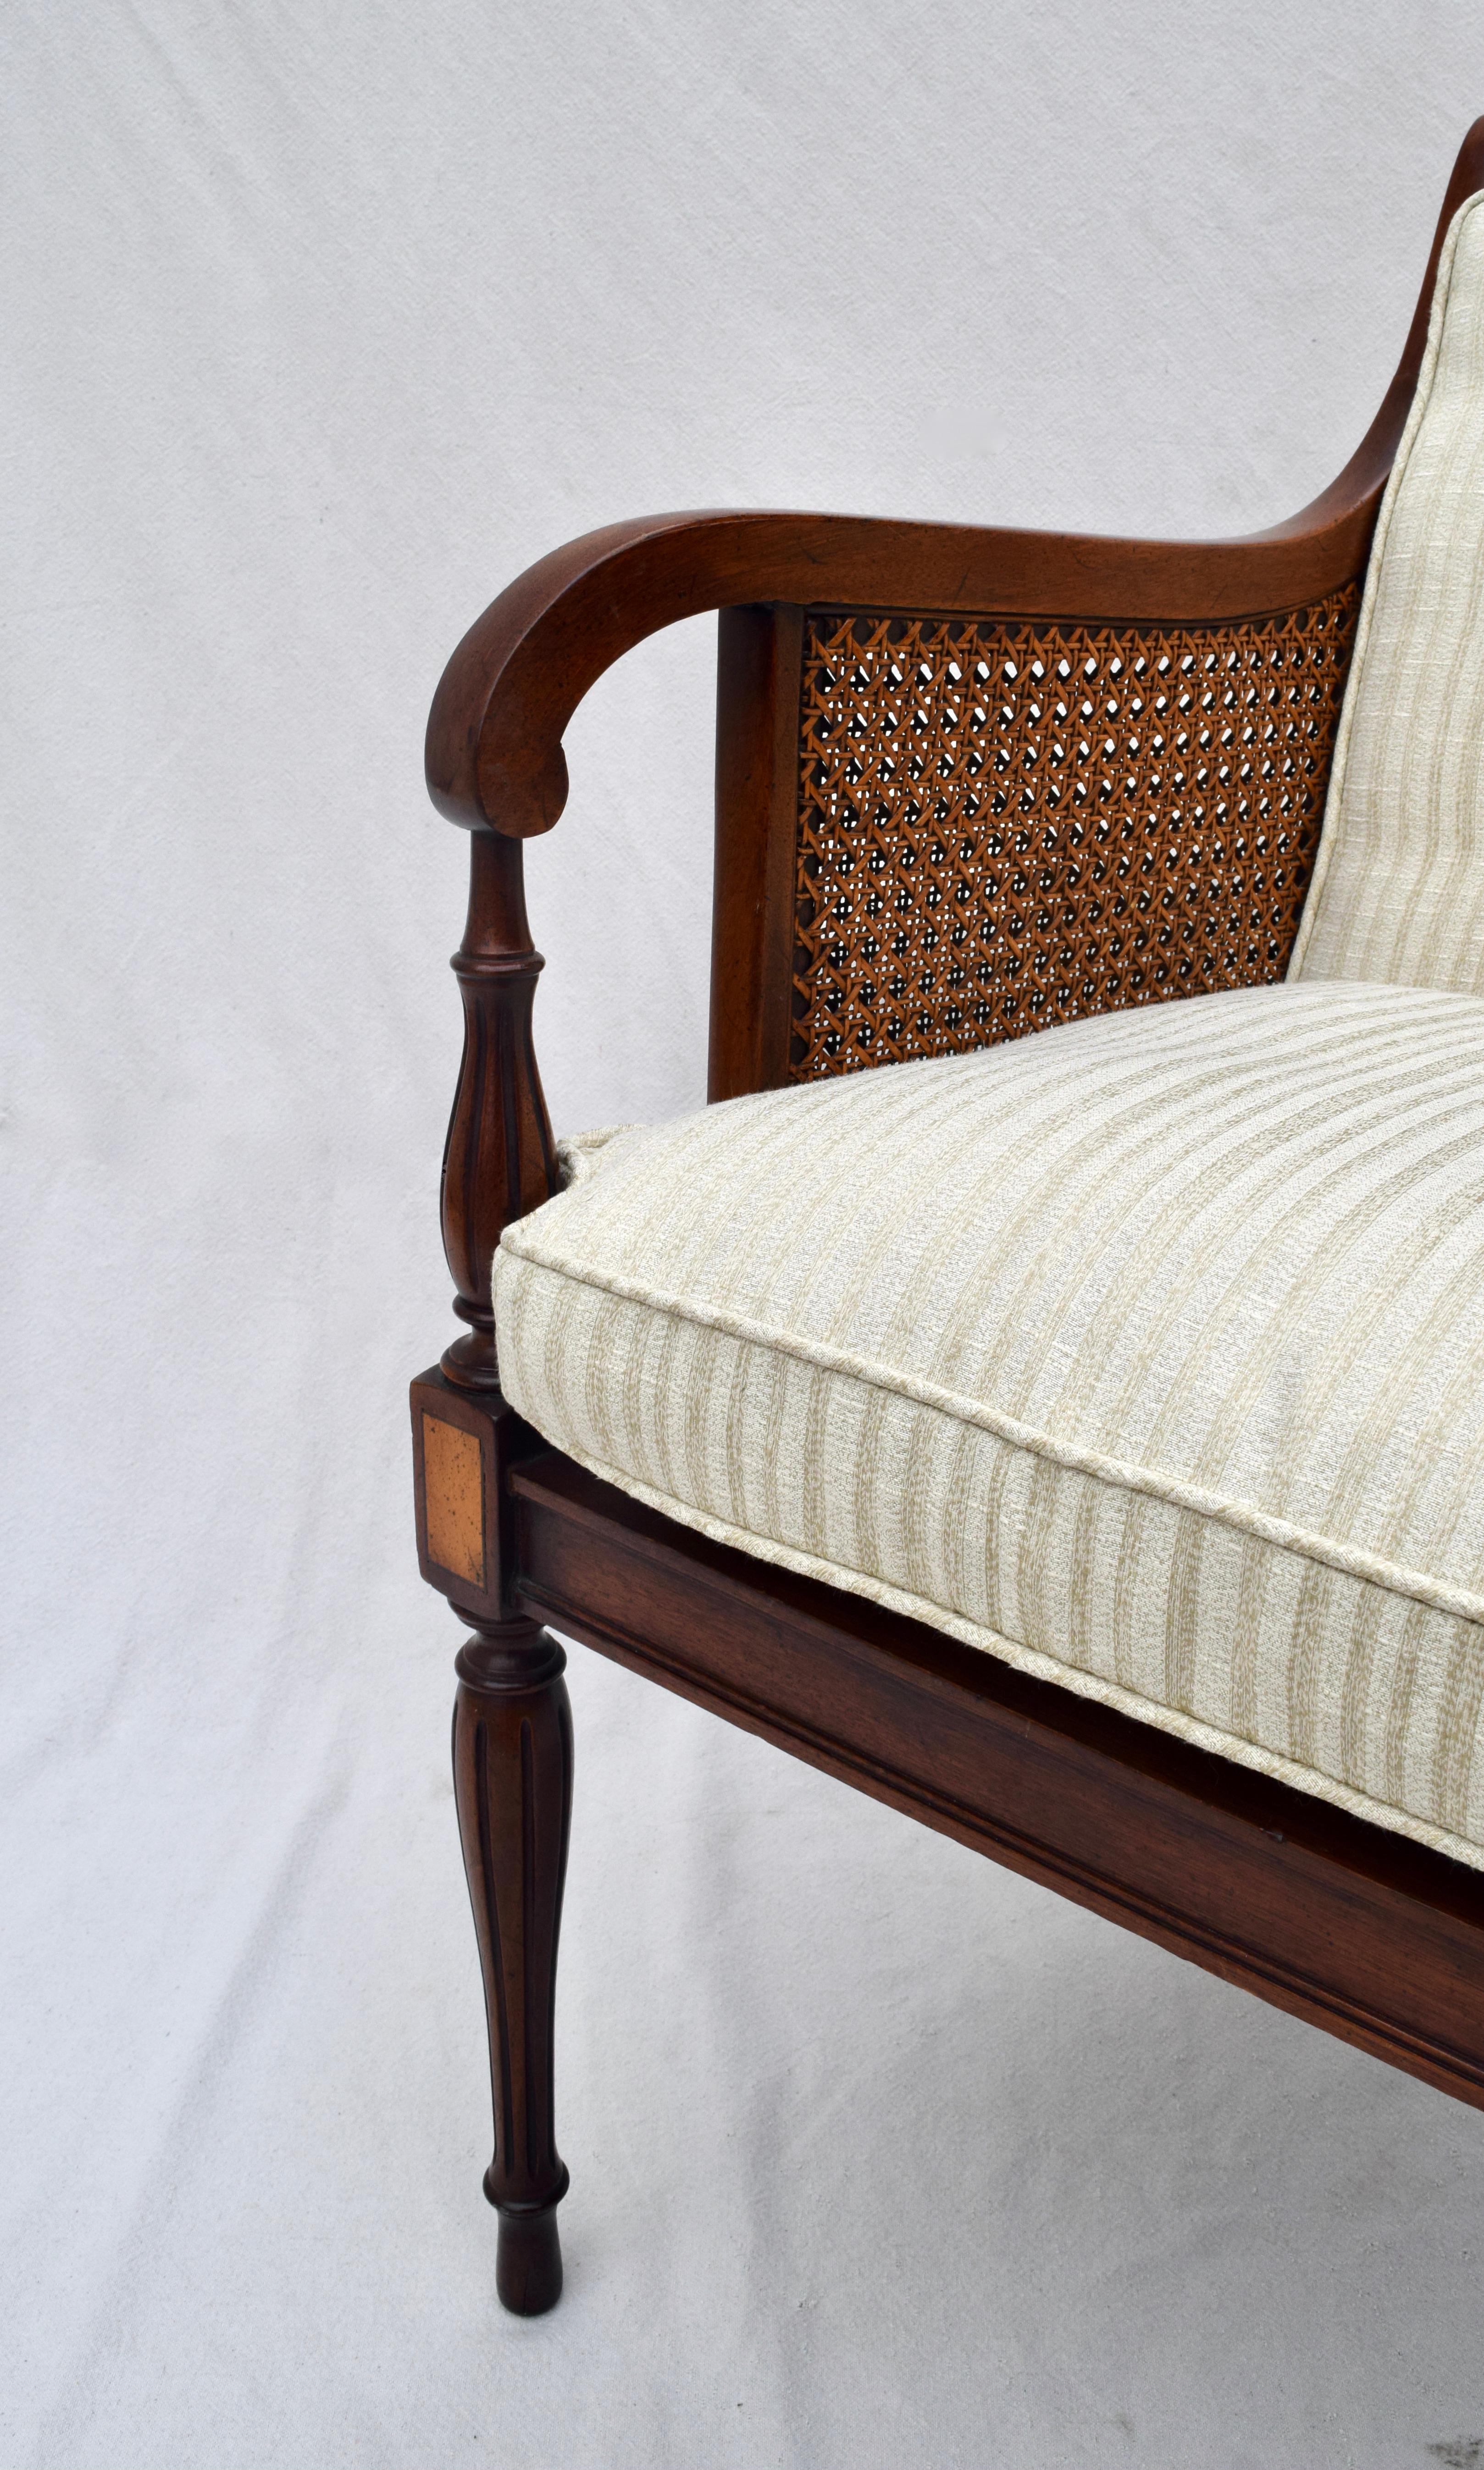 Hickory Chair Regency Style Double Caned Chairs 1